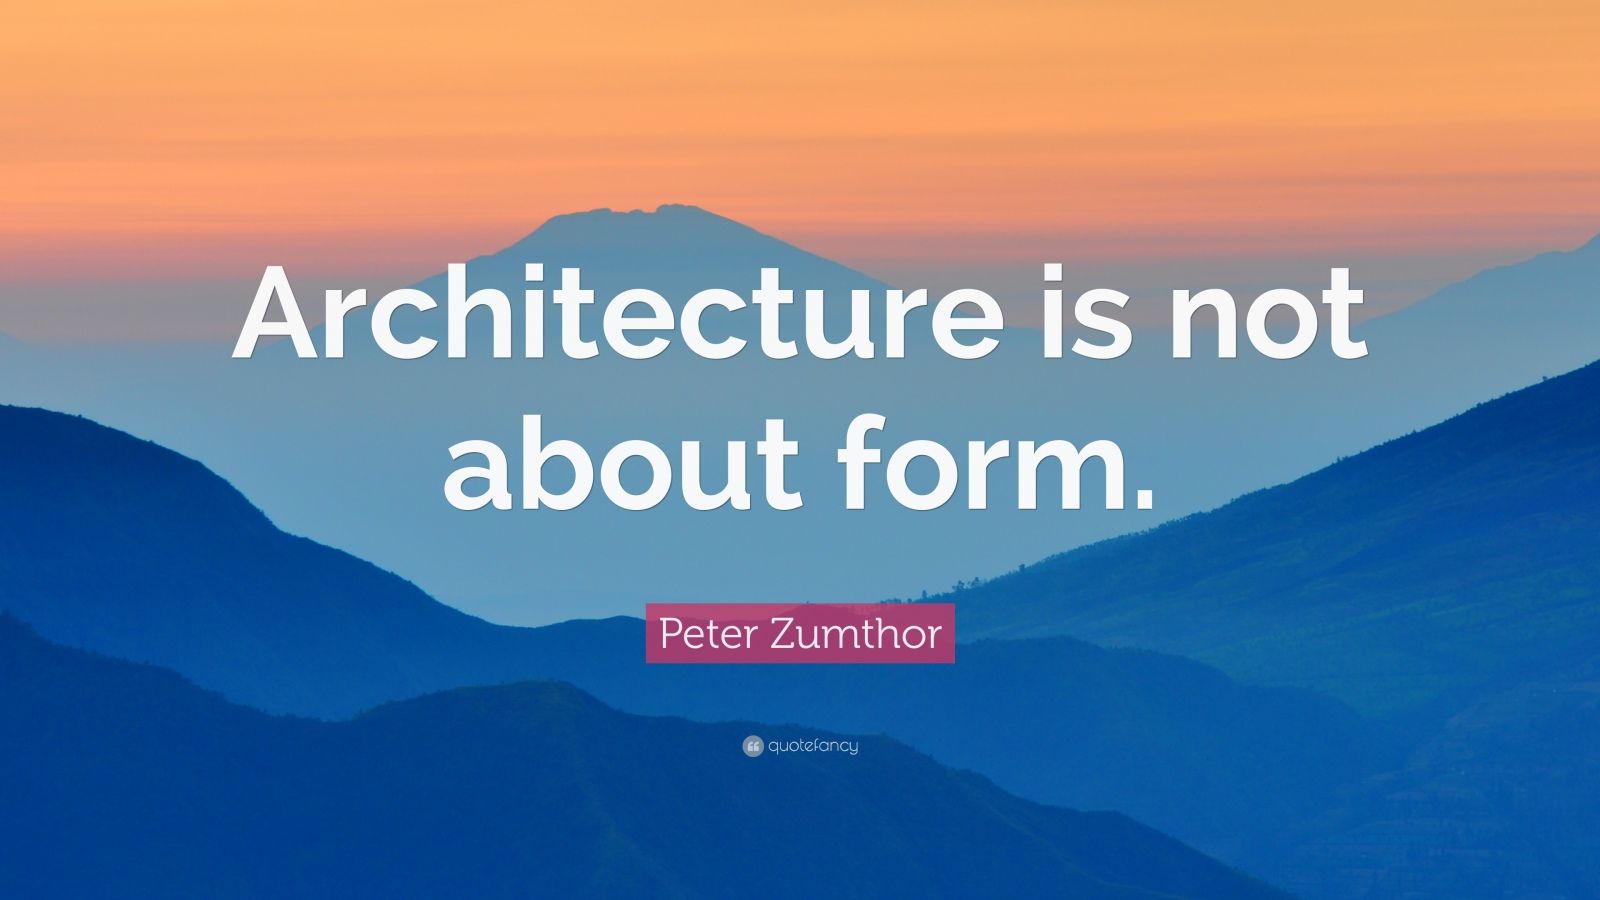 Peter Zumthor Quote: “Architecture is not about form.” (12 wallpapers ...